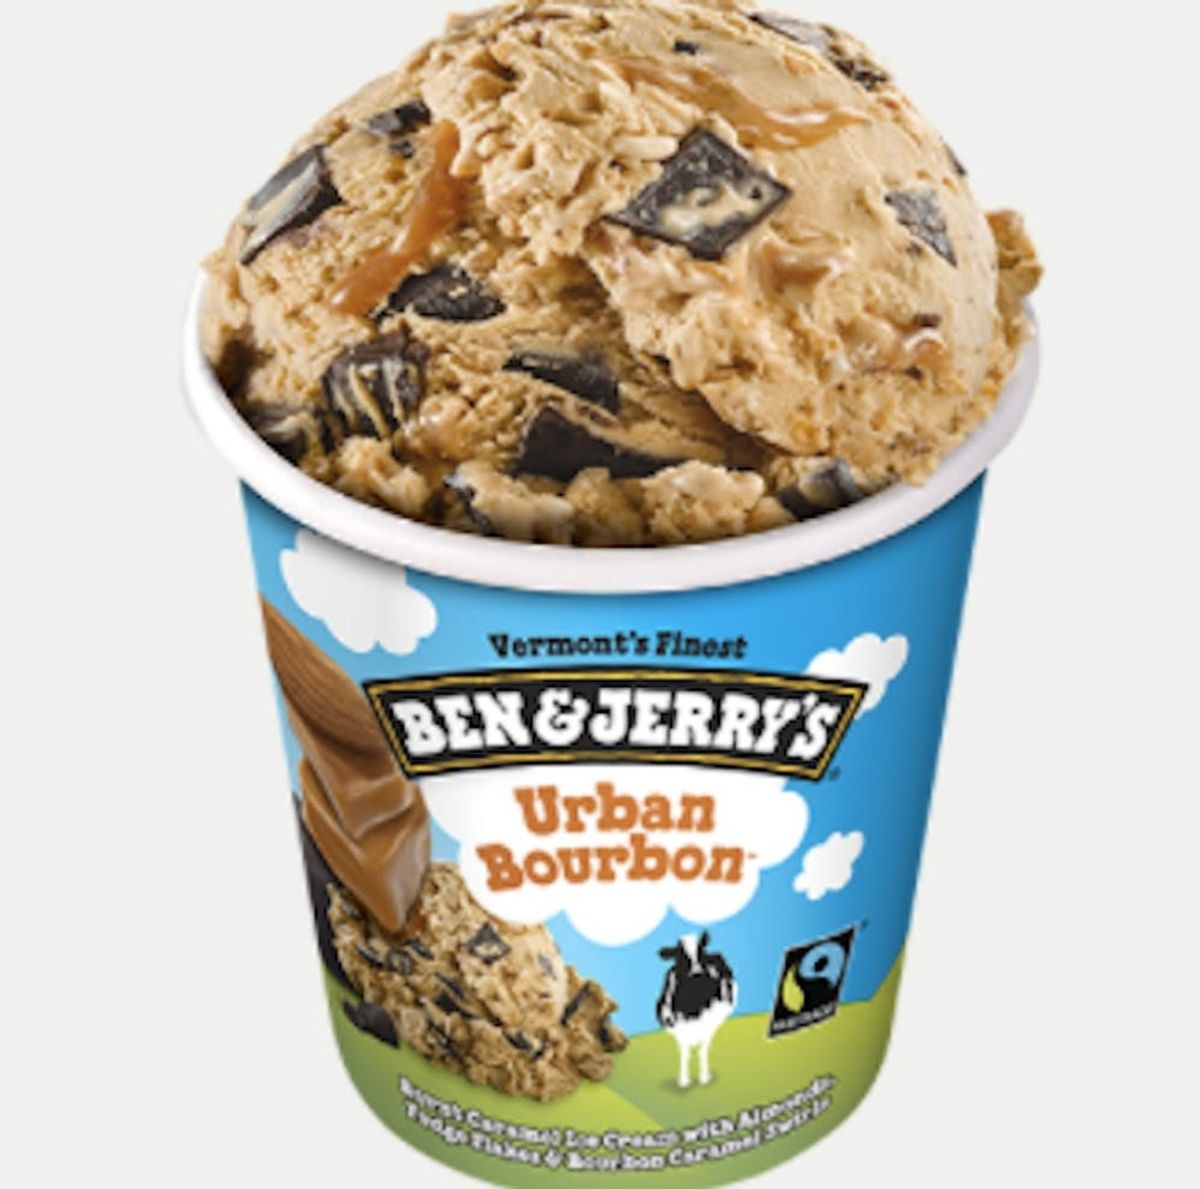 18 WTF Ice Cream Flavors You Can Try Right Now